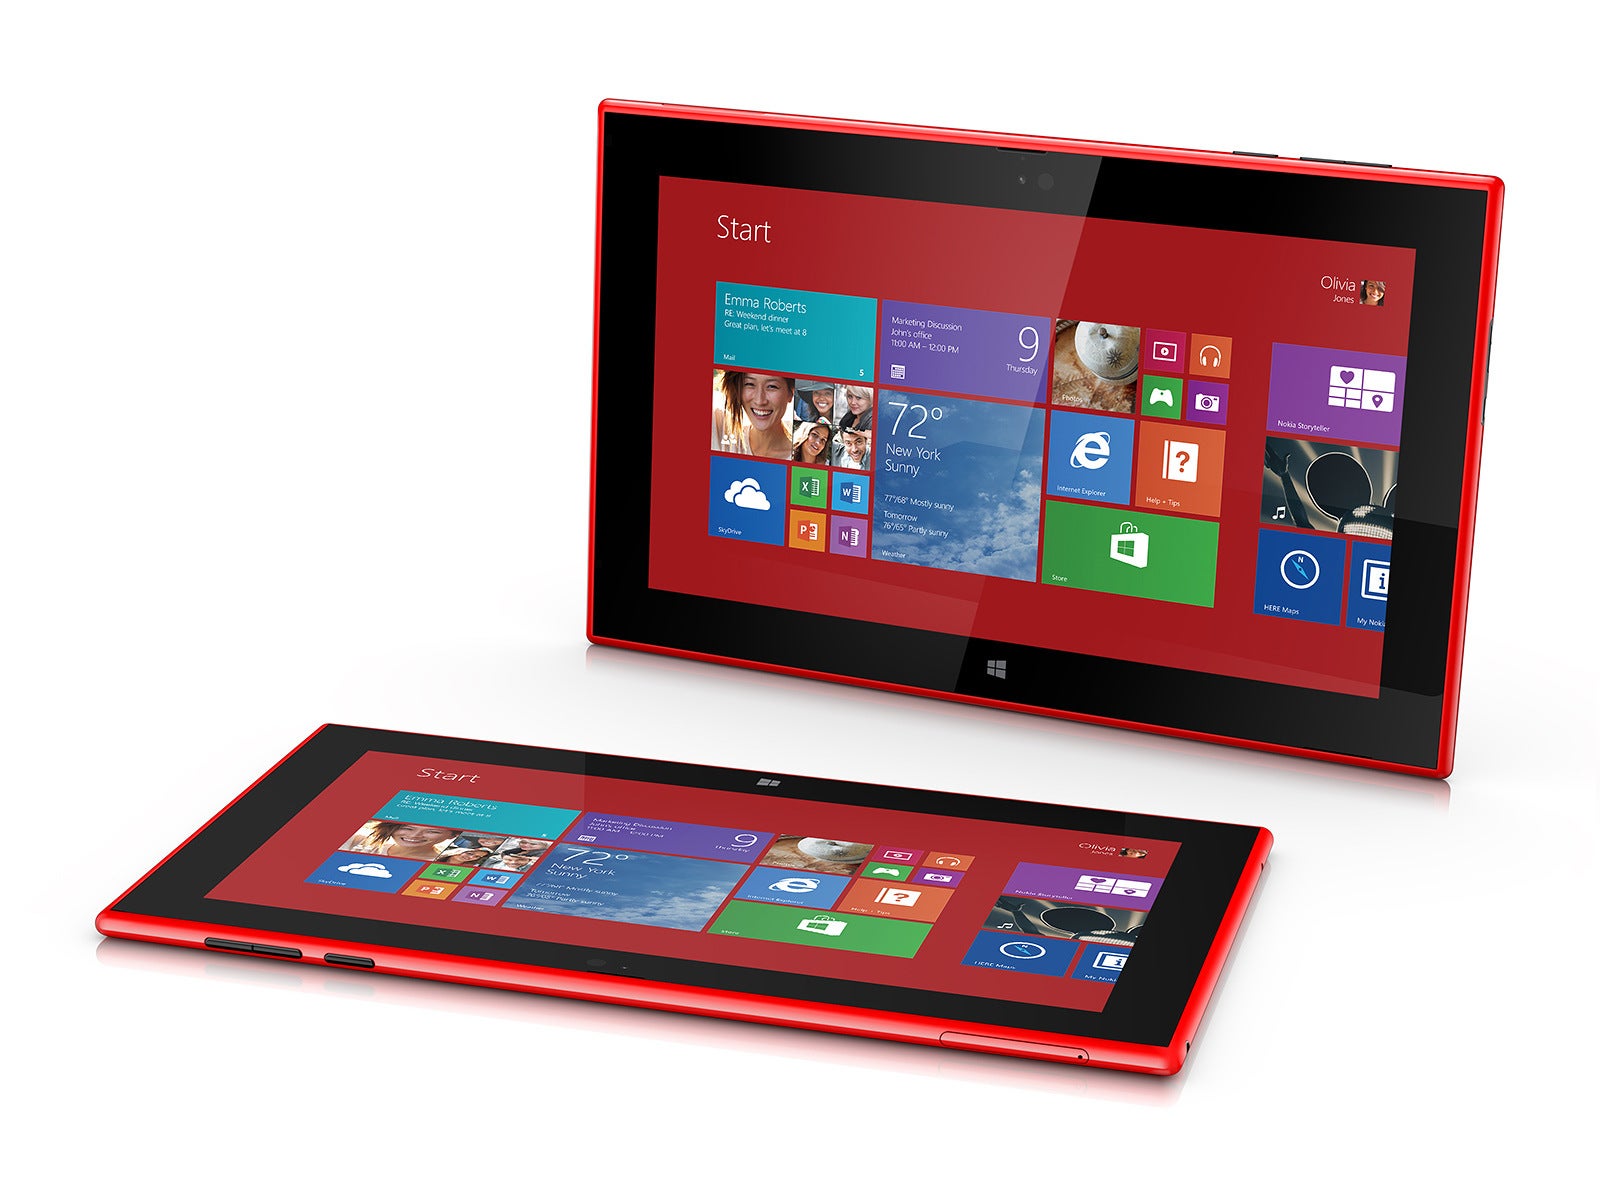 4G LTE is supported by the Nokia Lumia 2520 - Nokia Lumia 2520 specs review: a savior, or the last of its kind?